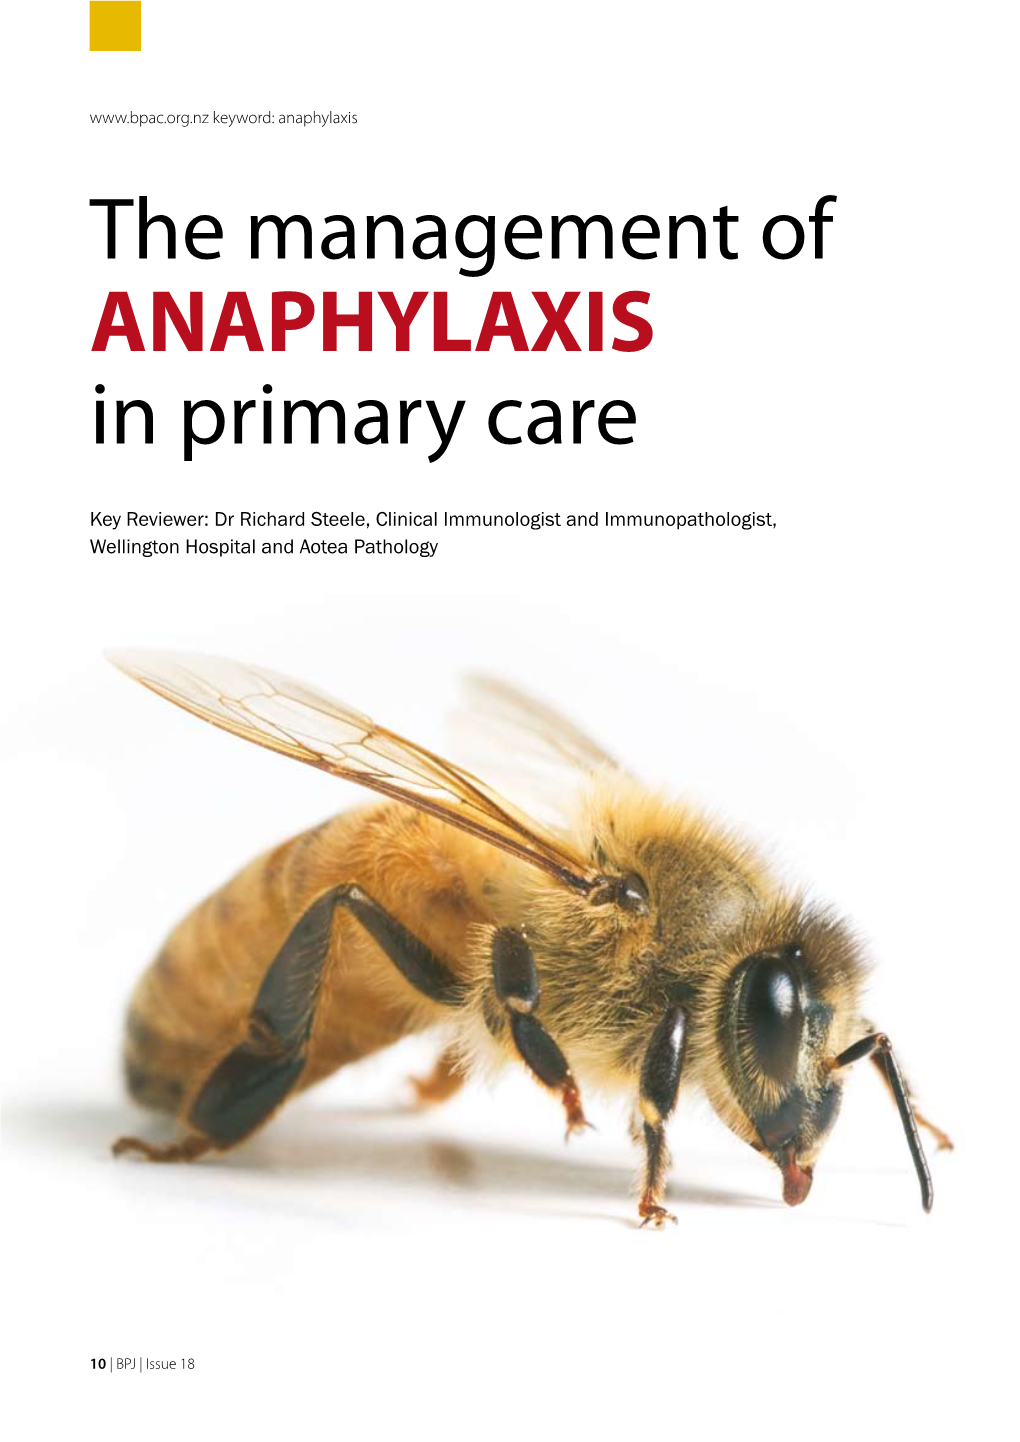 Anaphylaxis the Management of ANAPHYLAXIS in Primary Care